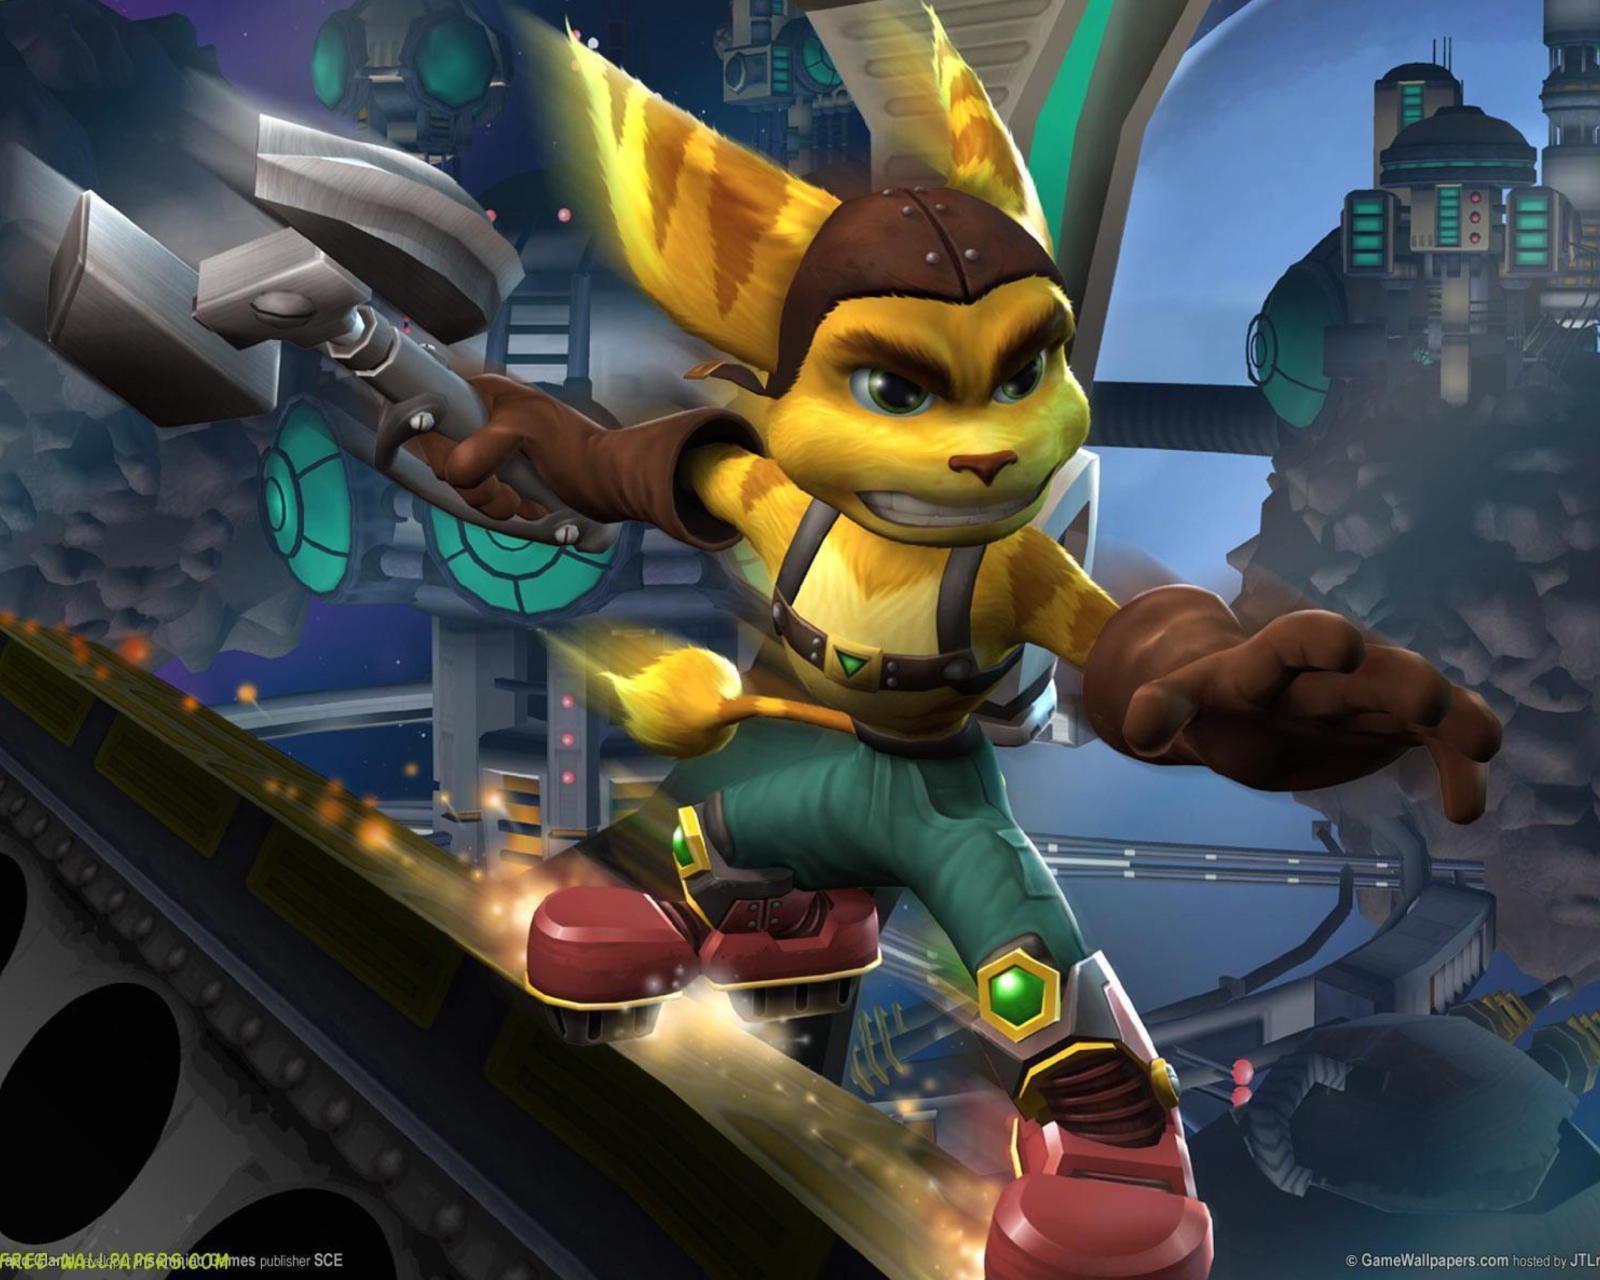 Das Ratchet and Clank Wallpaper 1600x1280